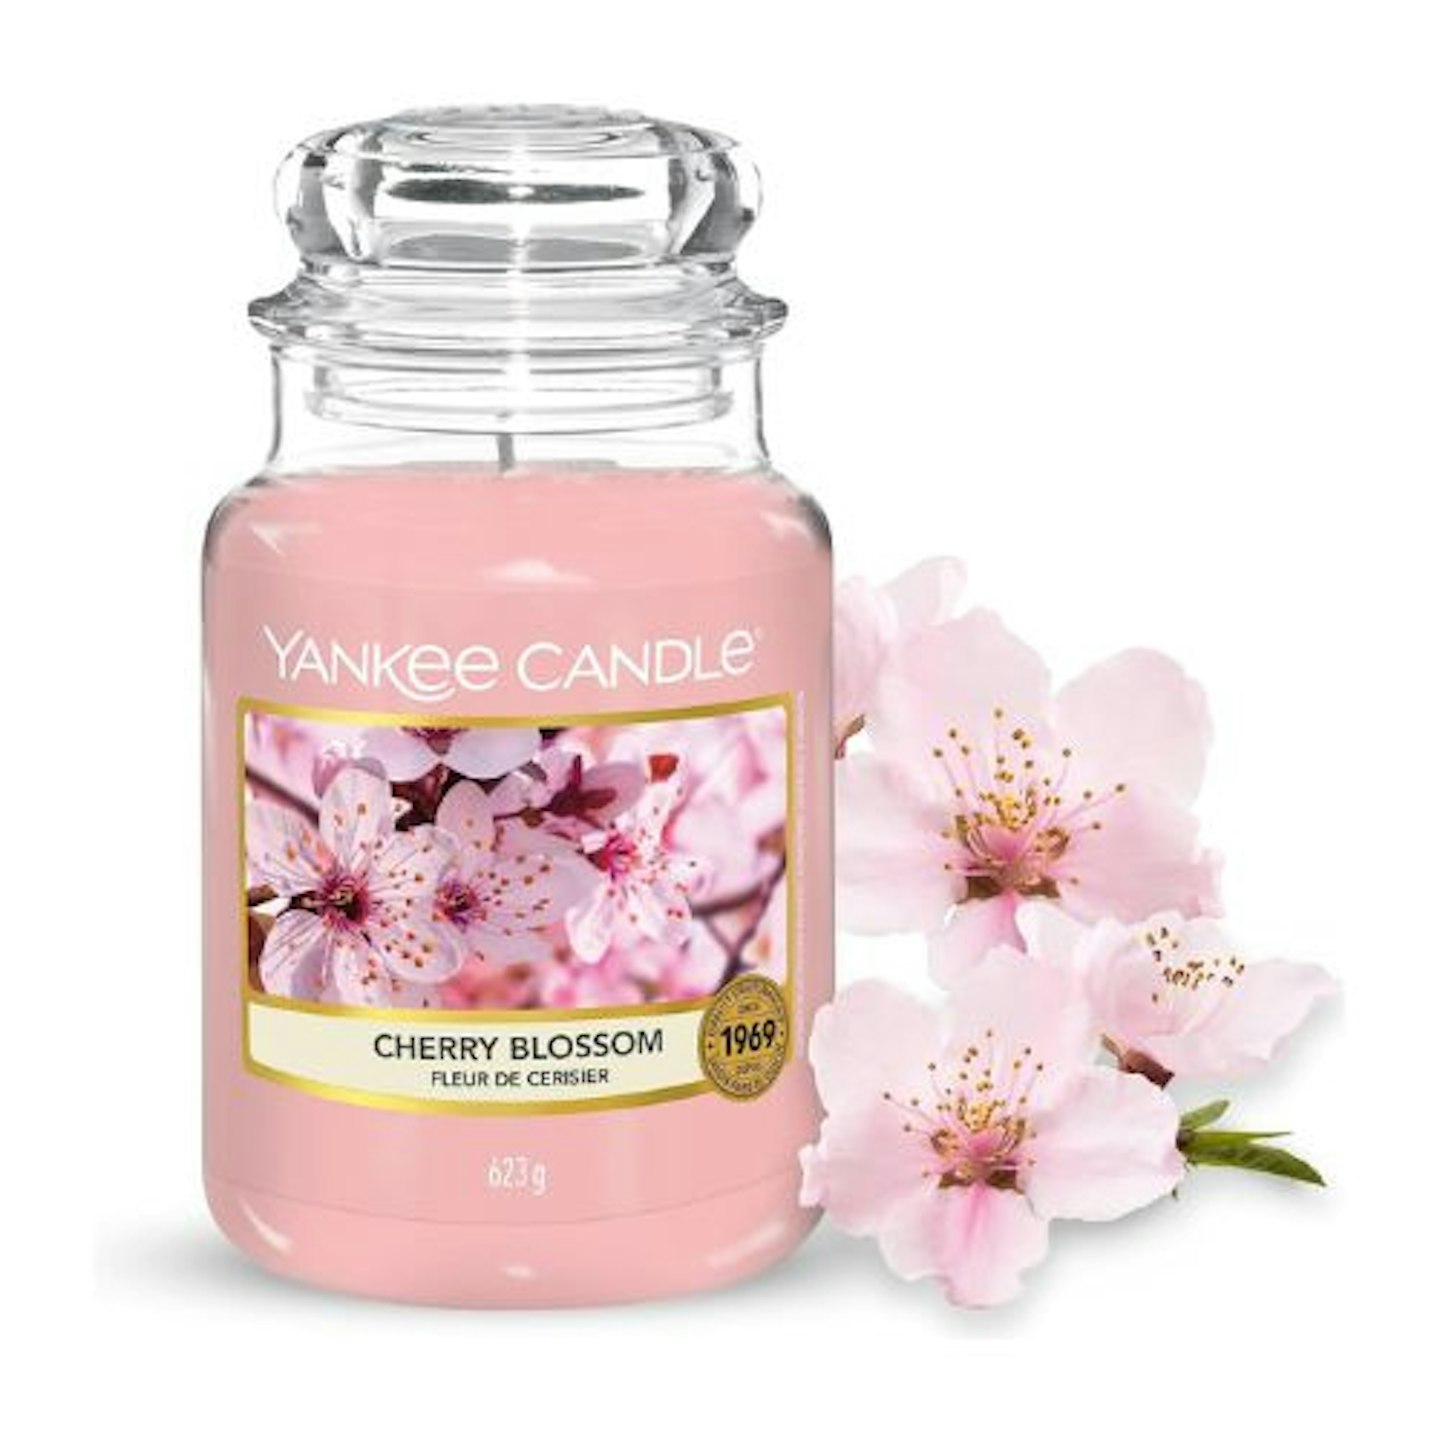 Yankee Candle Scented Candle | Cherry Blossom Large Jar Candle | Long Burning Candles: up to 150 Hours